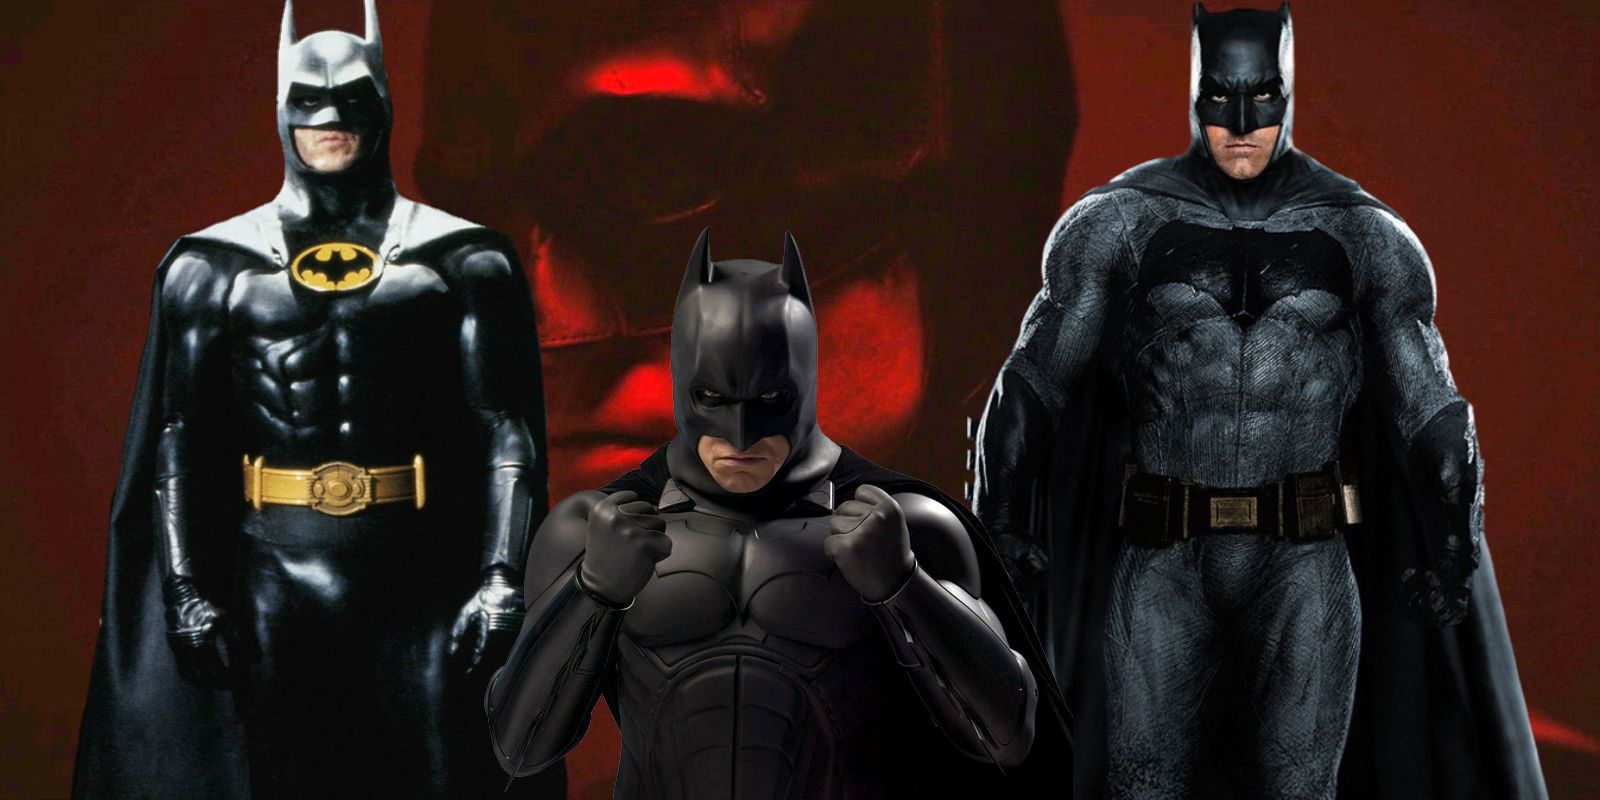 The Batman: How Robert Pattinson's Costume Compares To Previous Movies